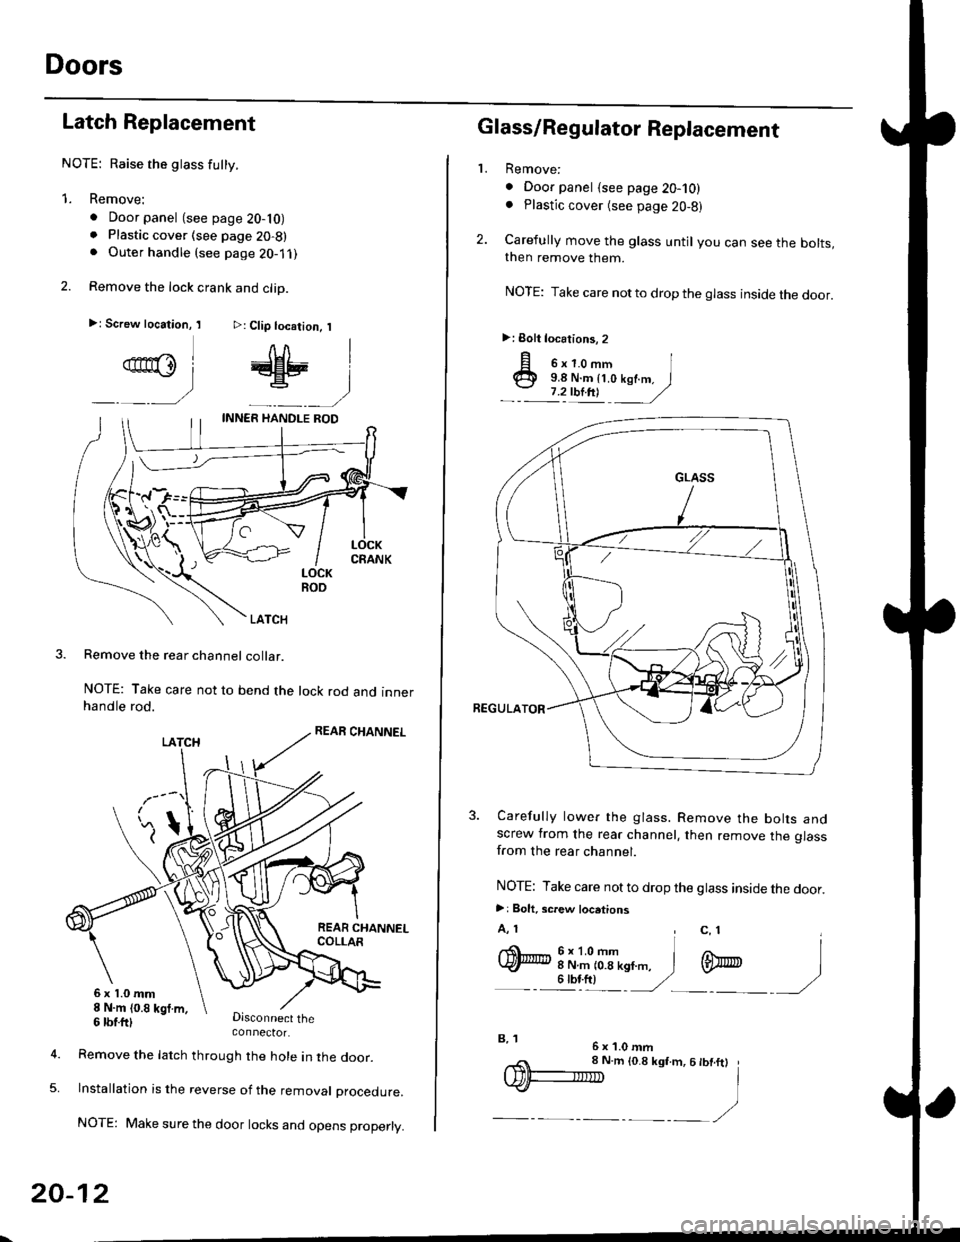 HONDA CIVIC 1998 6.G Workshop Manual Doors
Latch Replacement
NOTE: Raise the glass futty.
1. Remove:
. Door panel (see page 20-10). Plastic cover (see page 20-8). Outer handle (see page 2O-1 ,l
2. Remove the lock crank and clip.
>: Screw